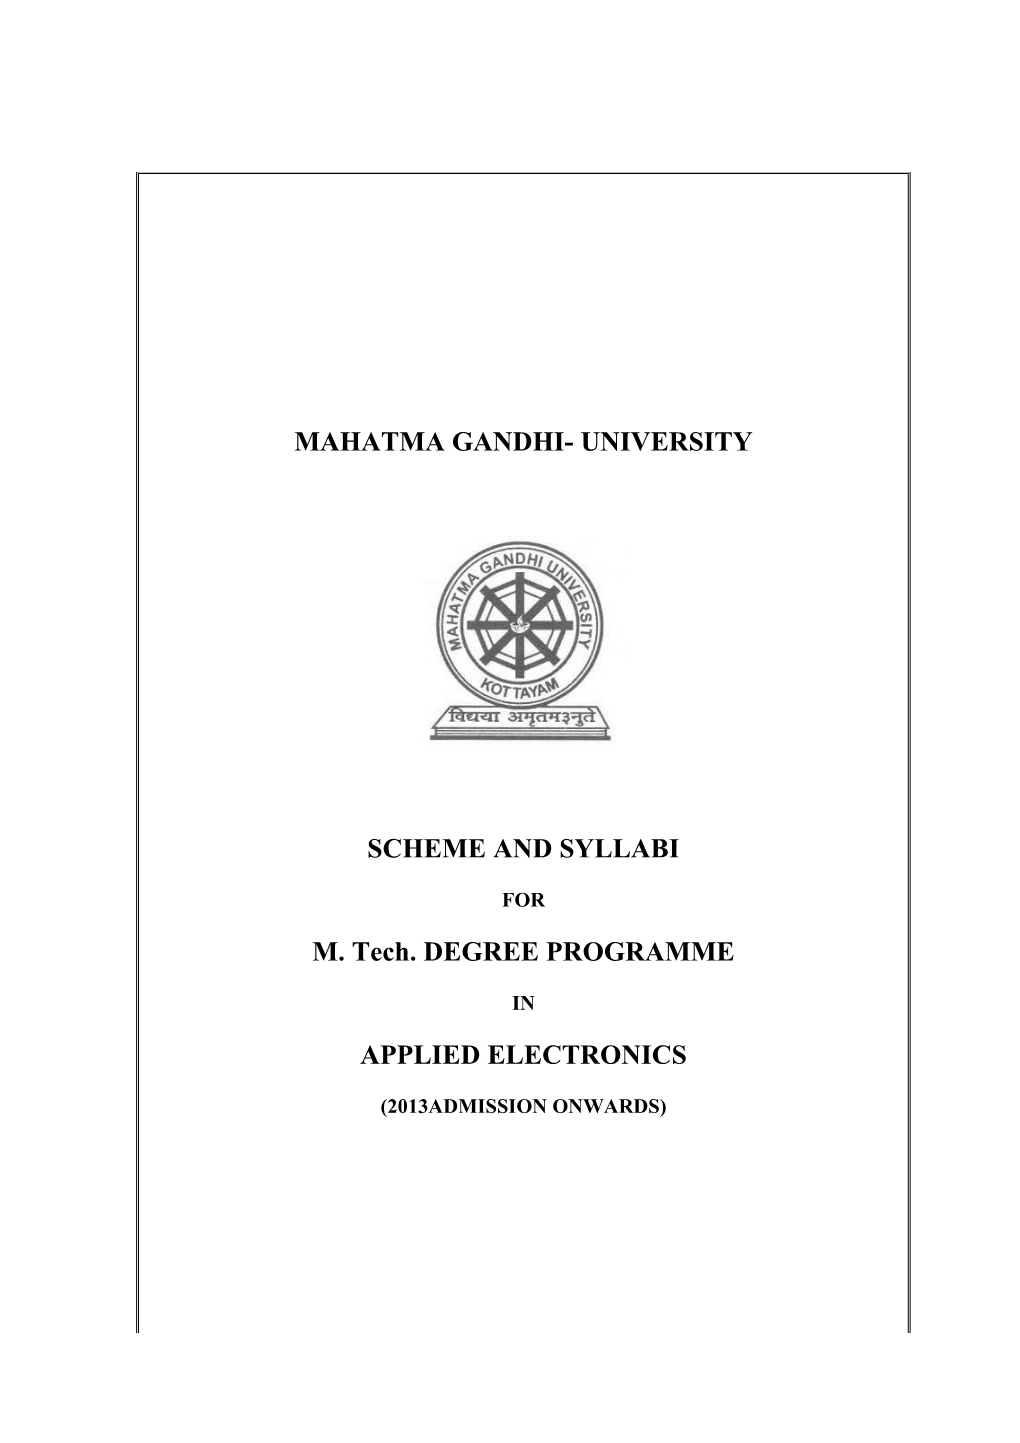 SCHEME and SYLLABI for M. Tech. DEGREE PROGRAMME in APPLIED ELECTRONICS